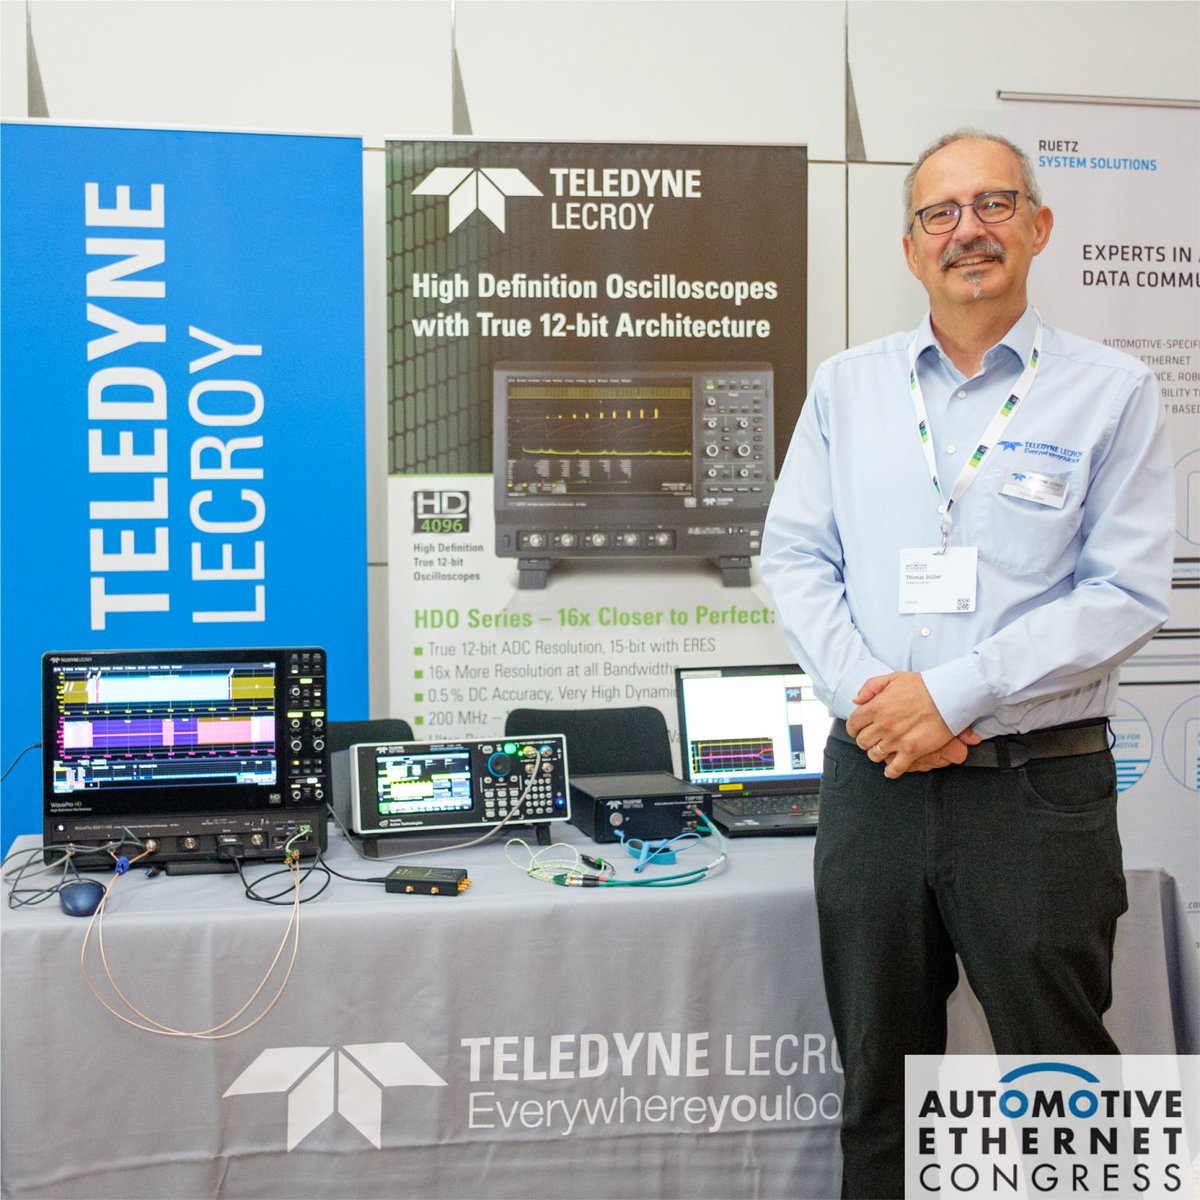 We're exhibiting at #AutomotiveEthernetCongress in Munich June 1-2. Come talk to us about all aspects of physical layer #AutomotiveEthernet compliance testing and debug. 

#oscilloscope #ethernet #testing #automotive #TeledyneLeCroy